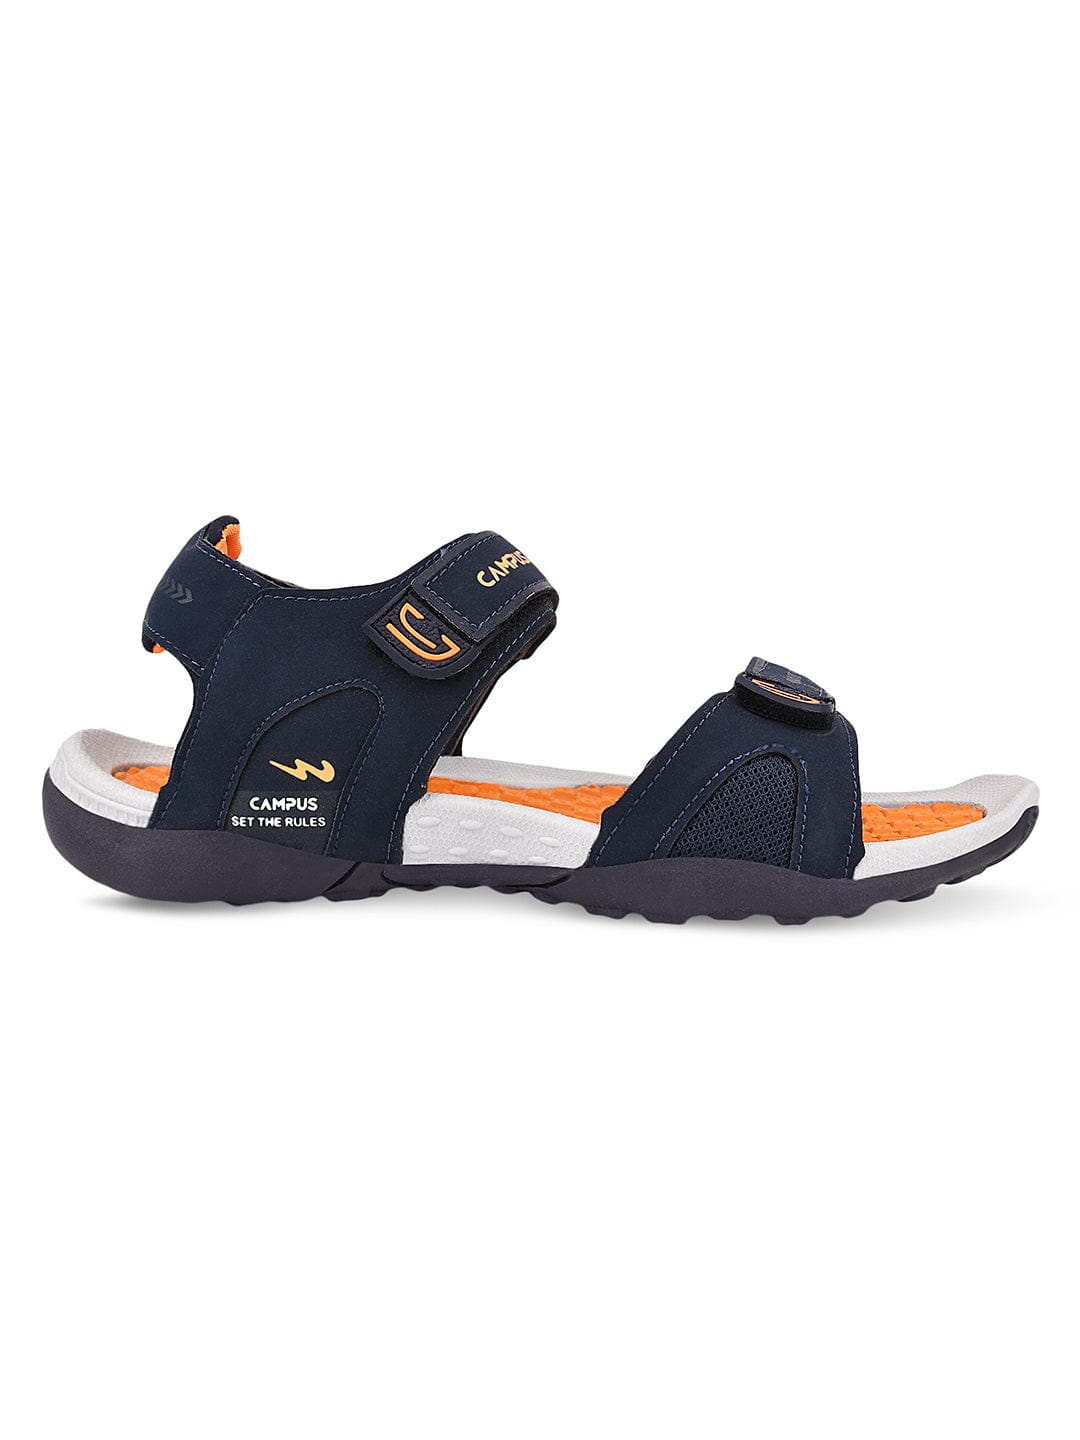 Campus Men's GC-22107 BLK/SIL Sports Sandals 6-UK/India : Amazon.in: Fashion